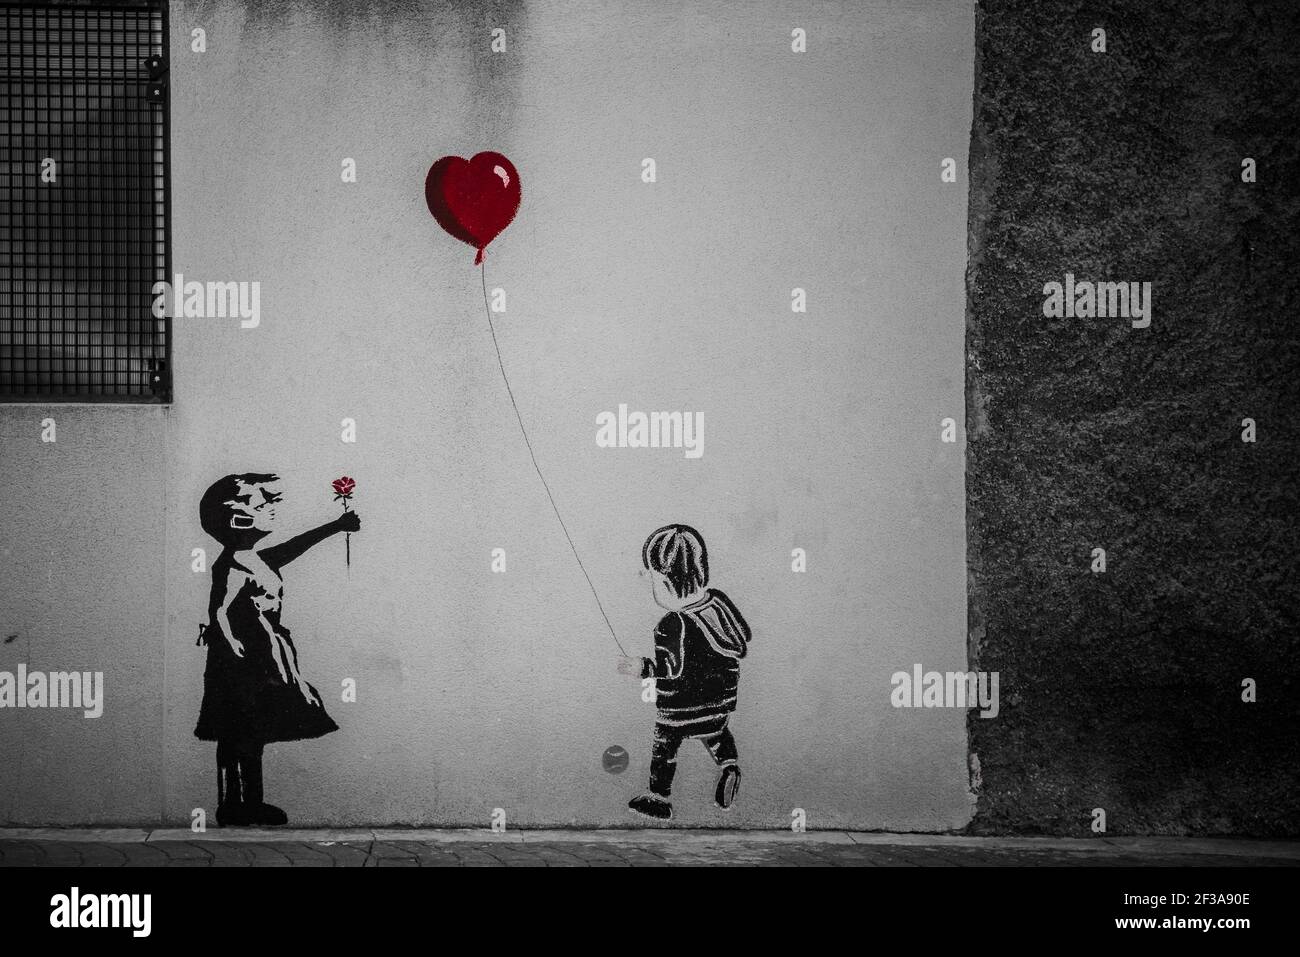 Graffiti of children playing with red balloon Stock Photo